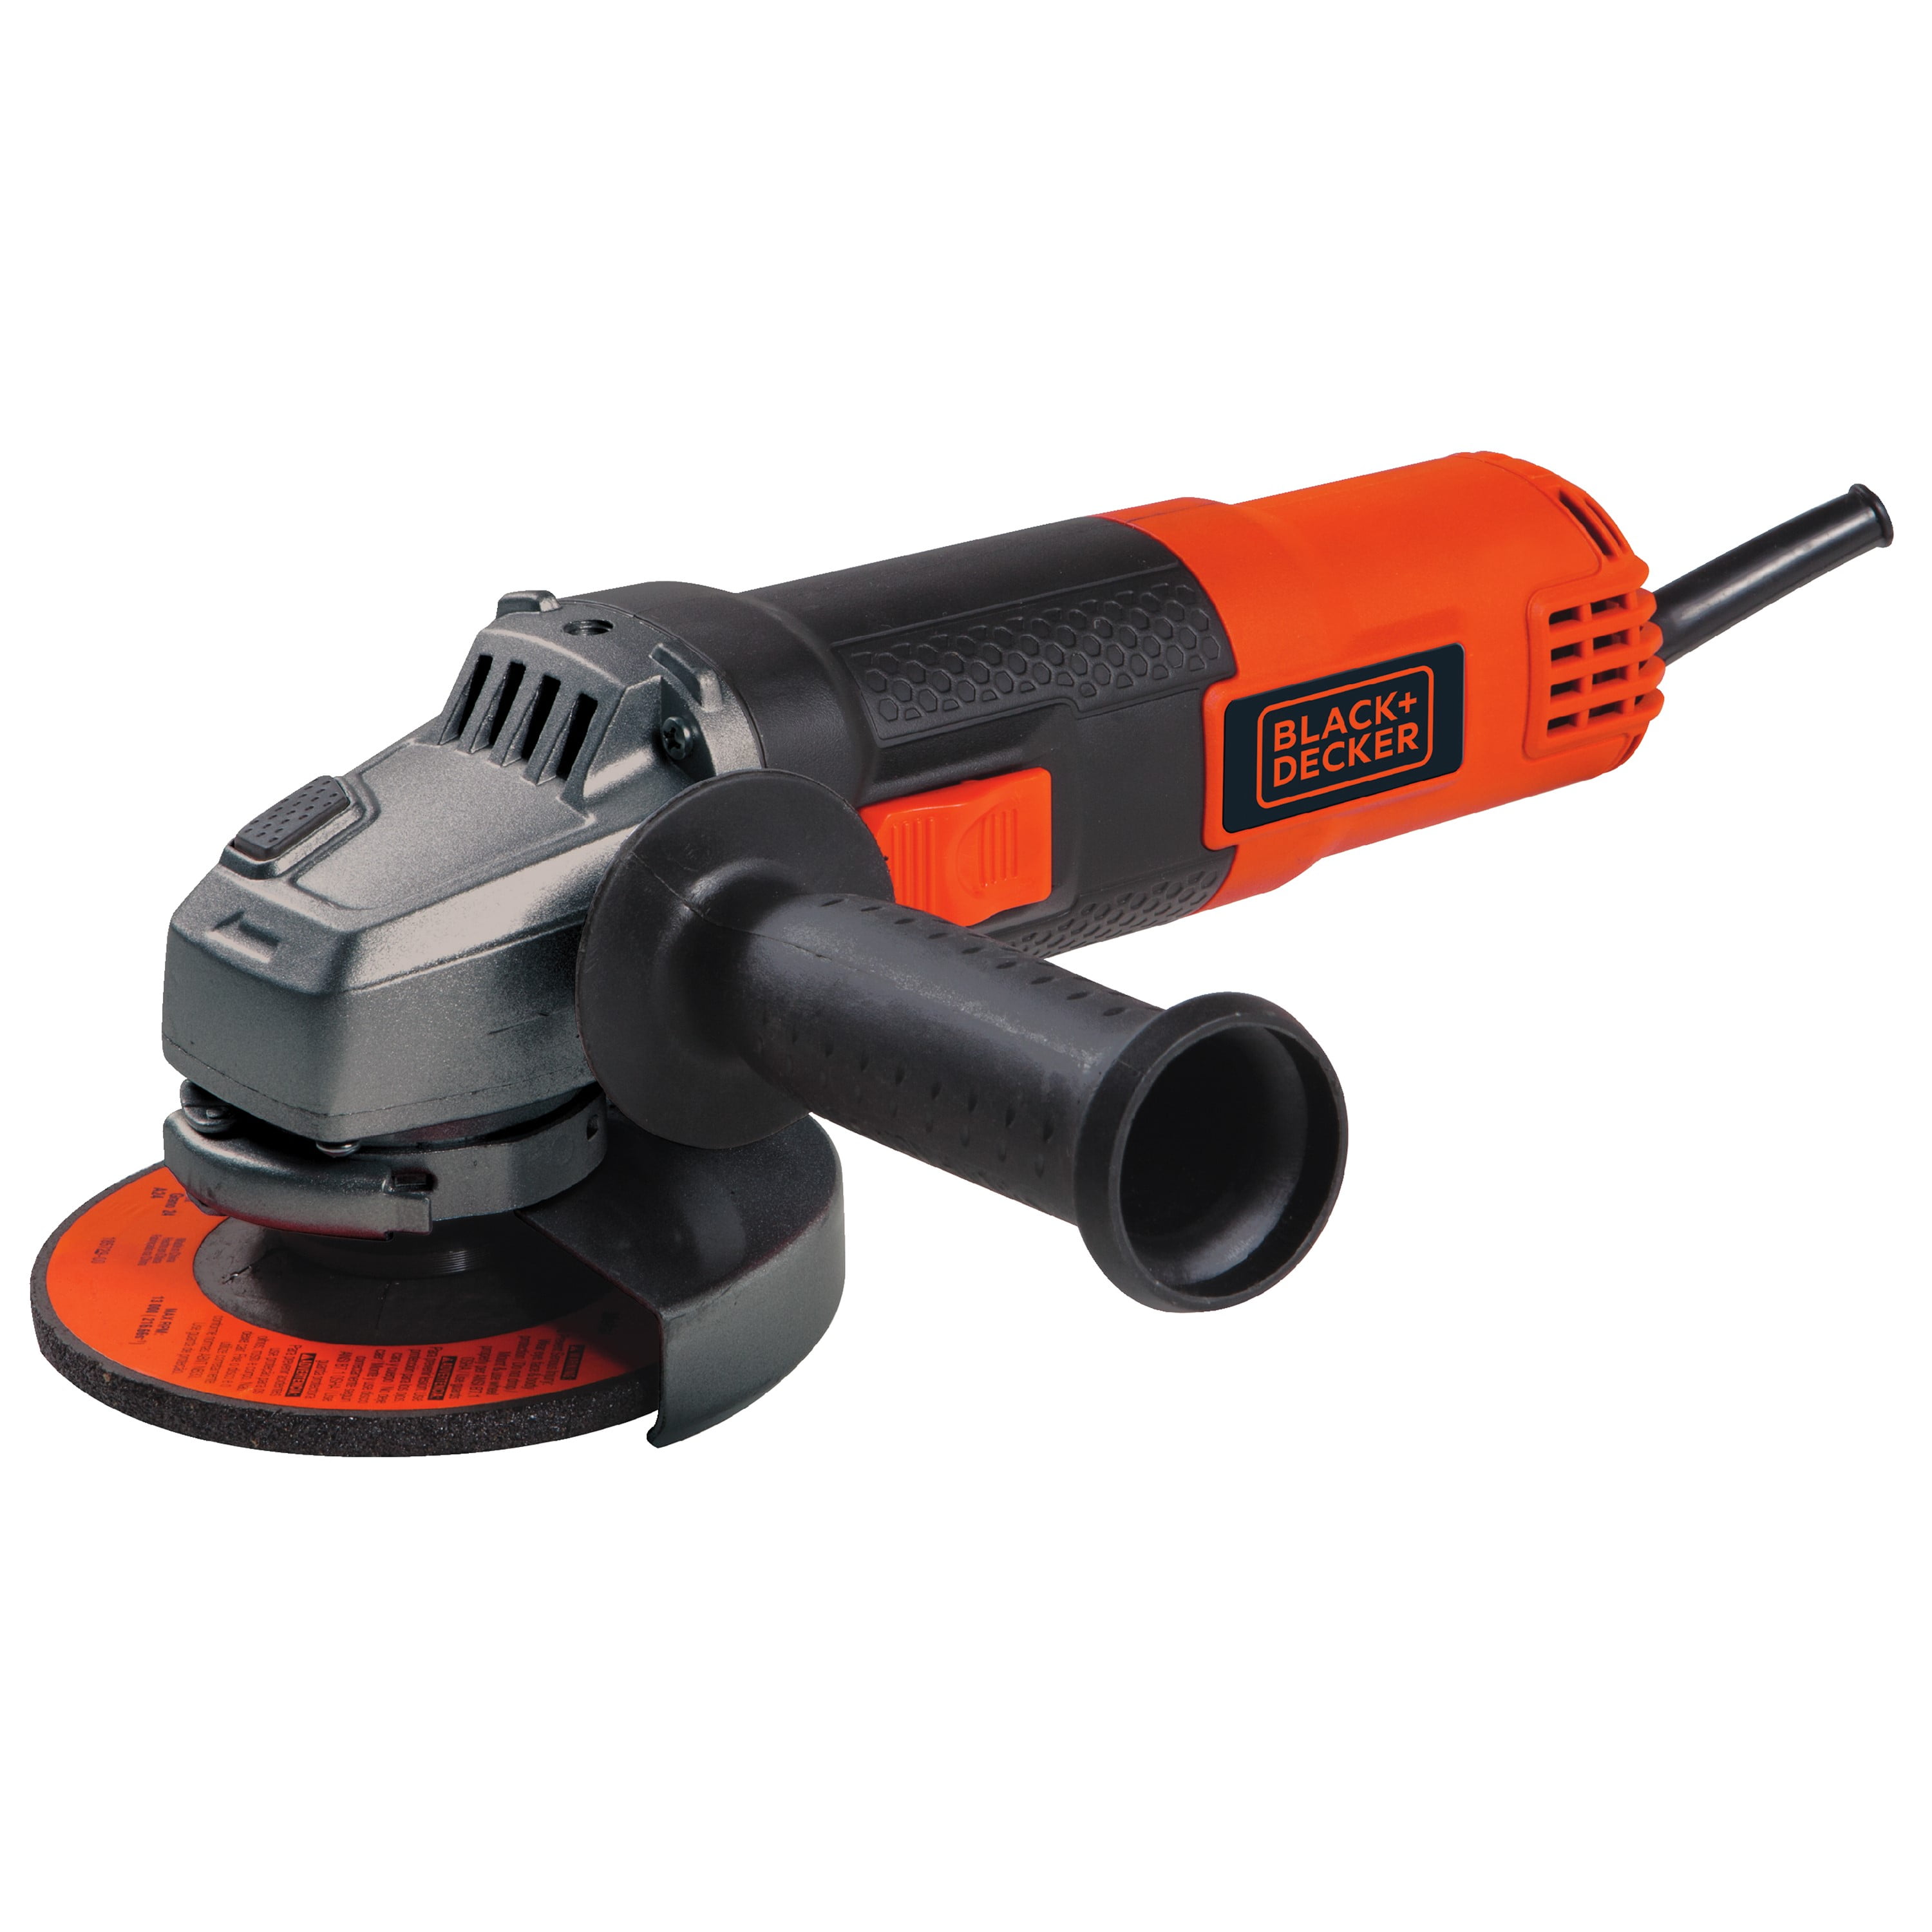 2 Cutting Wh AVID POWER Angle Grinder 7.5-Amp 4-1/2 inch with 2 Grinding Wheels